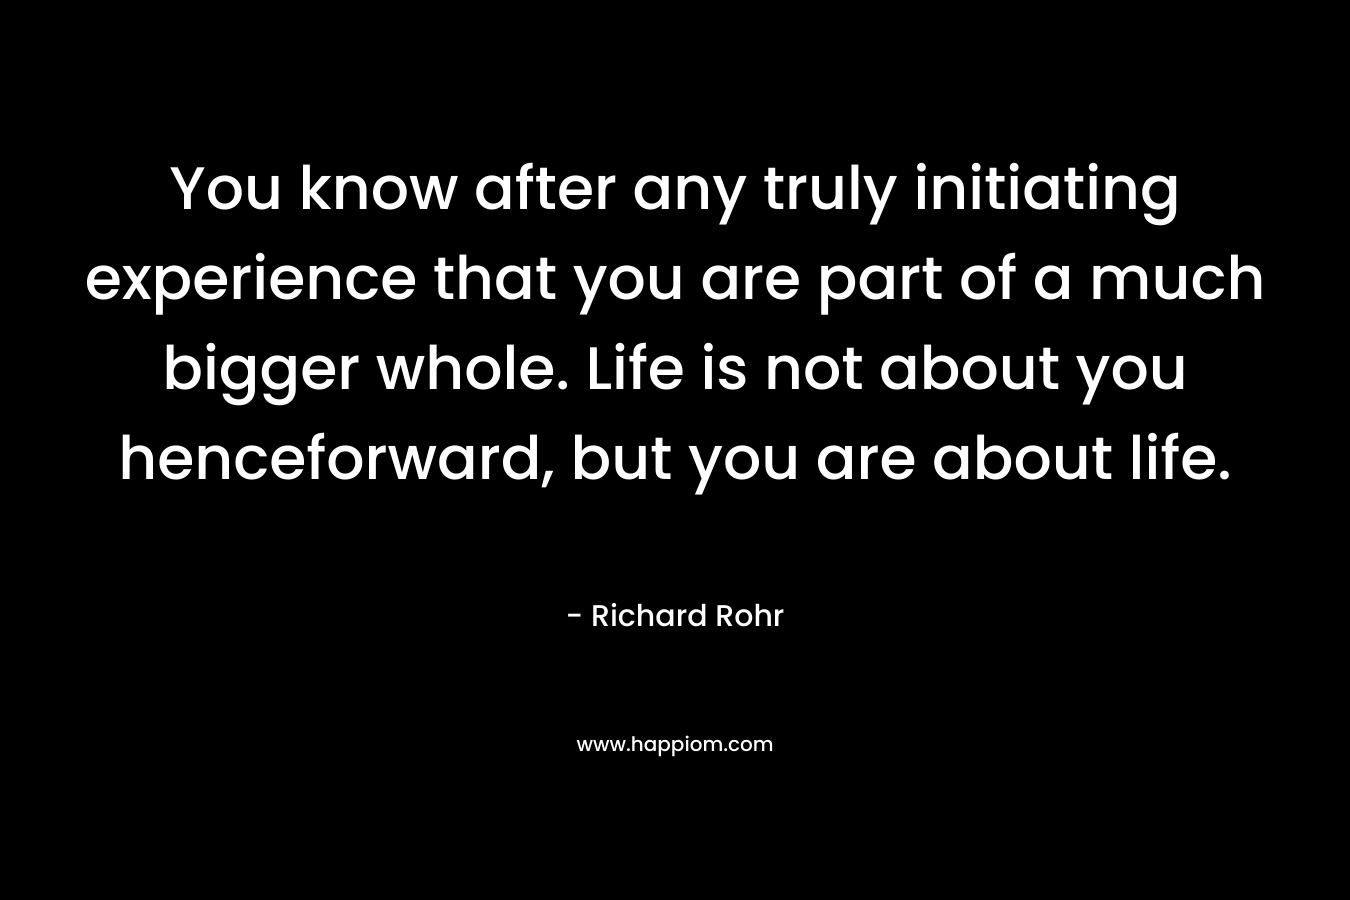 You know after any truly initiating experience that you are part of a much bigger whole. Life is not about you henceforward, but you are about life. – Richard Rohr